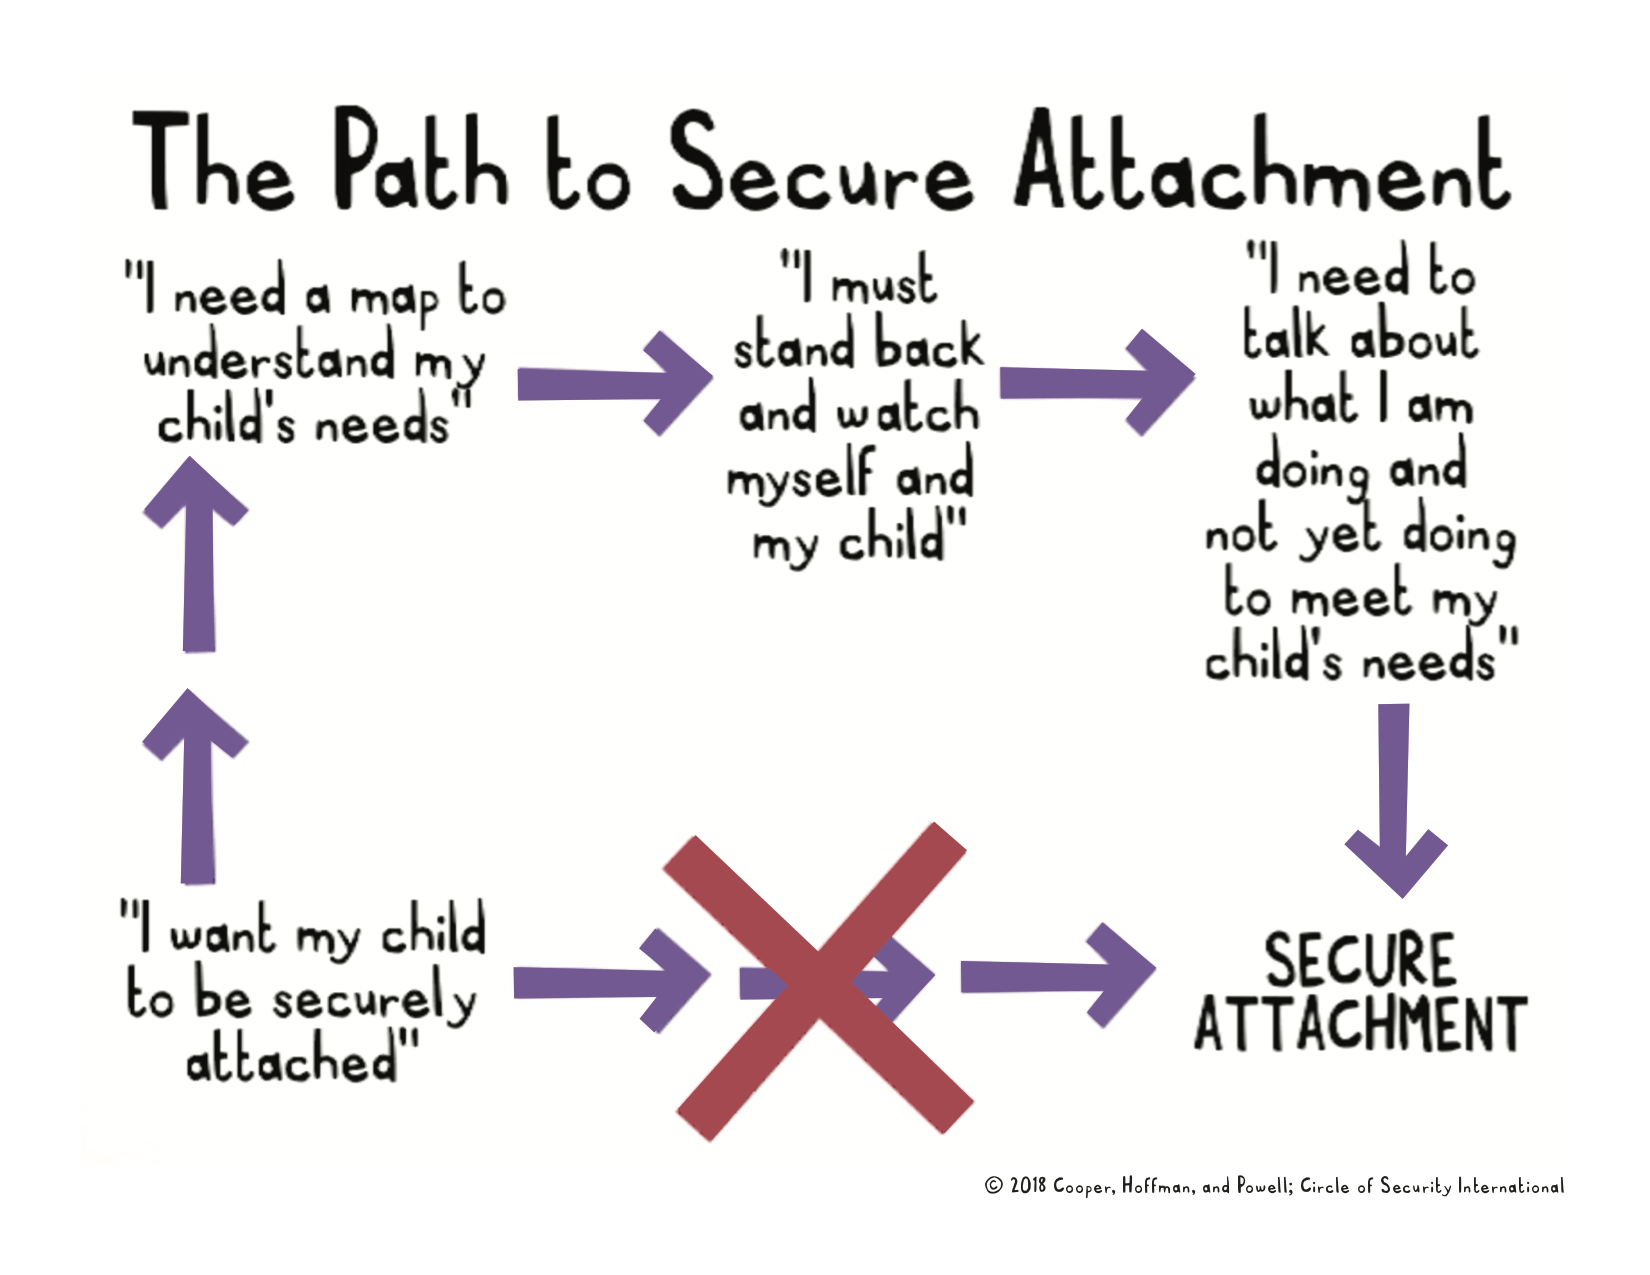 Illustration of the path to secure attachment